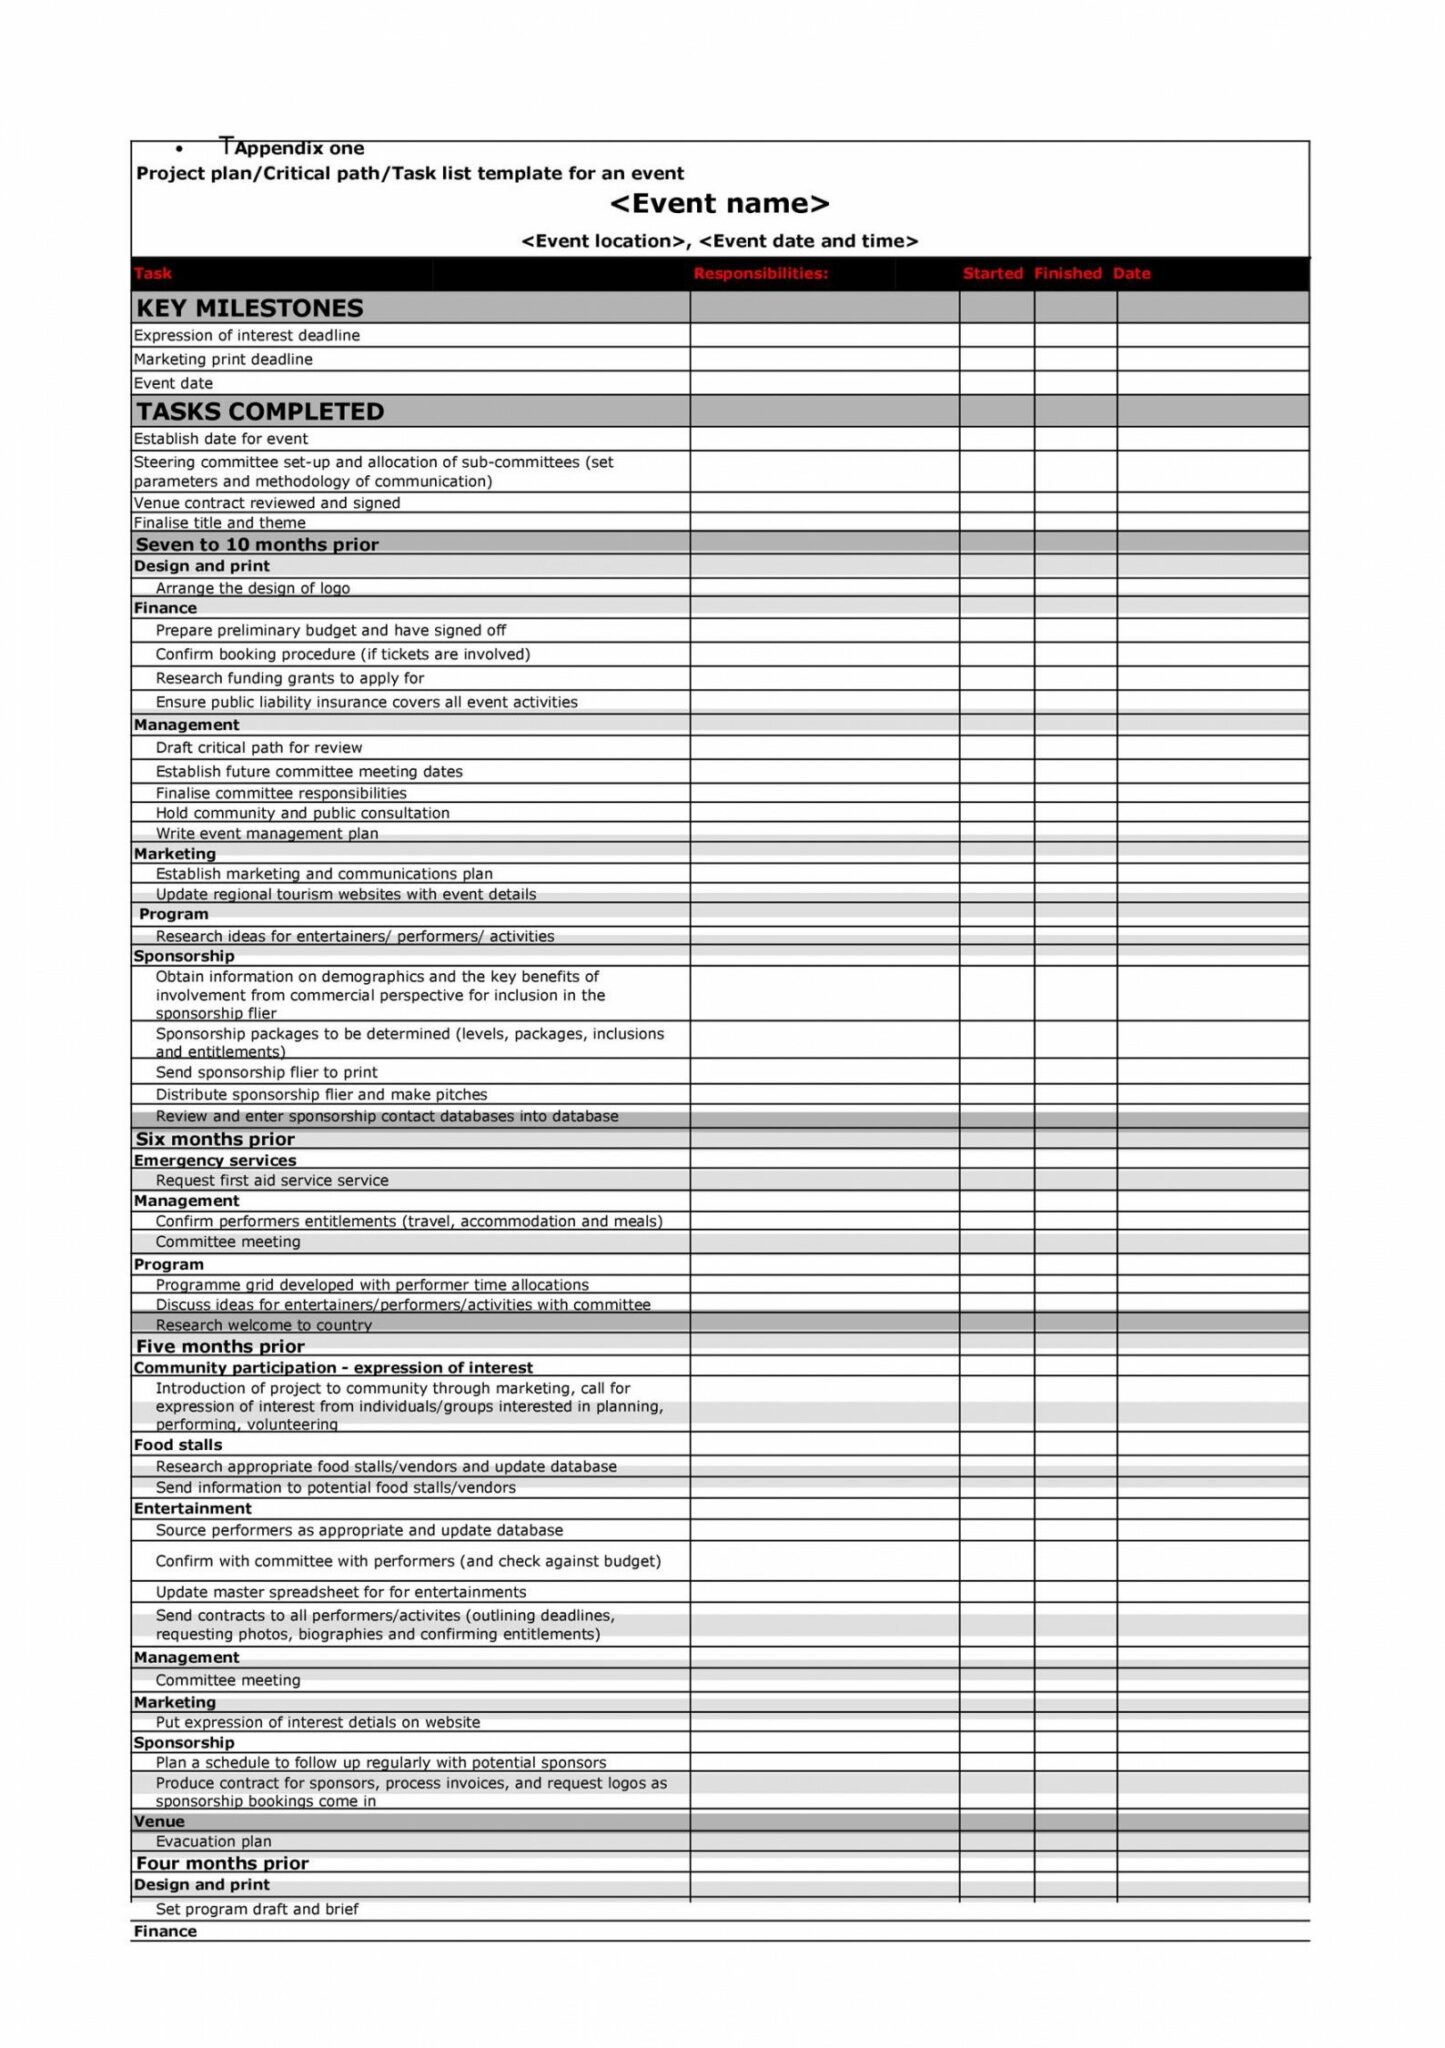 Free 50 Professional Event Planning Checklist Templates ᐅ Corporate